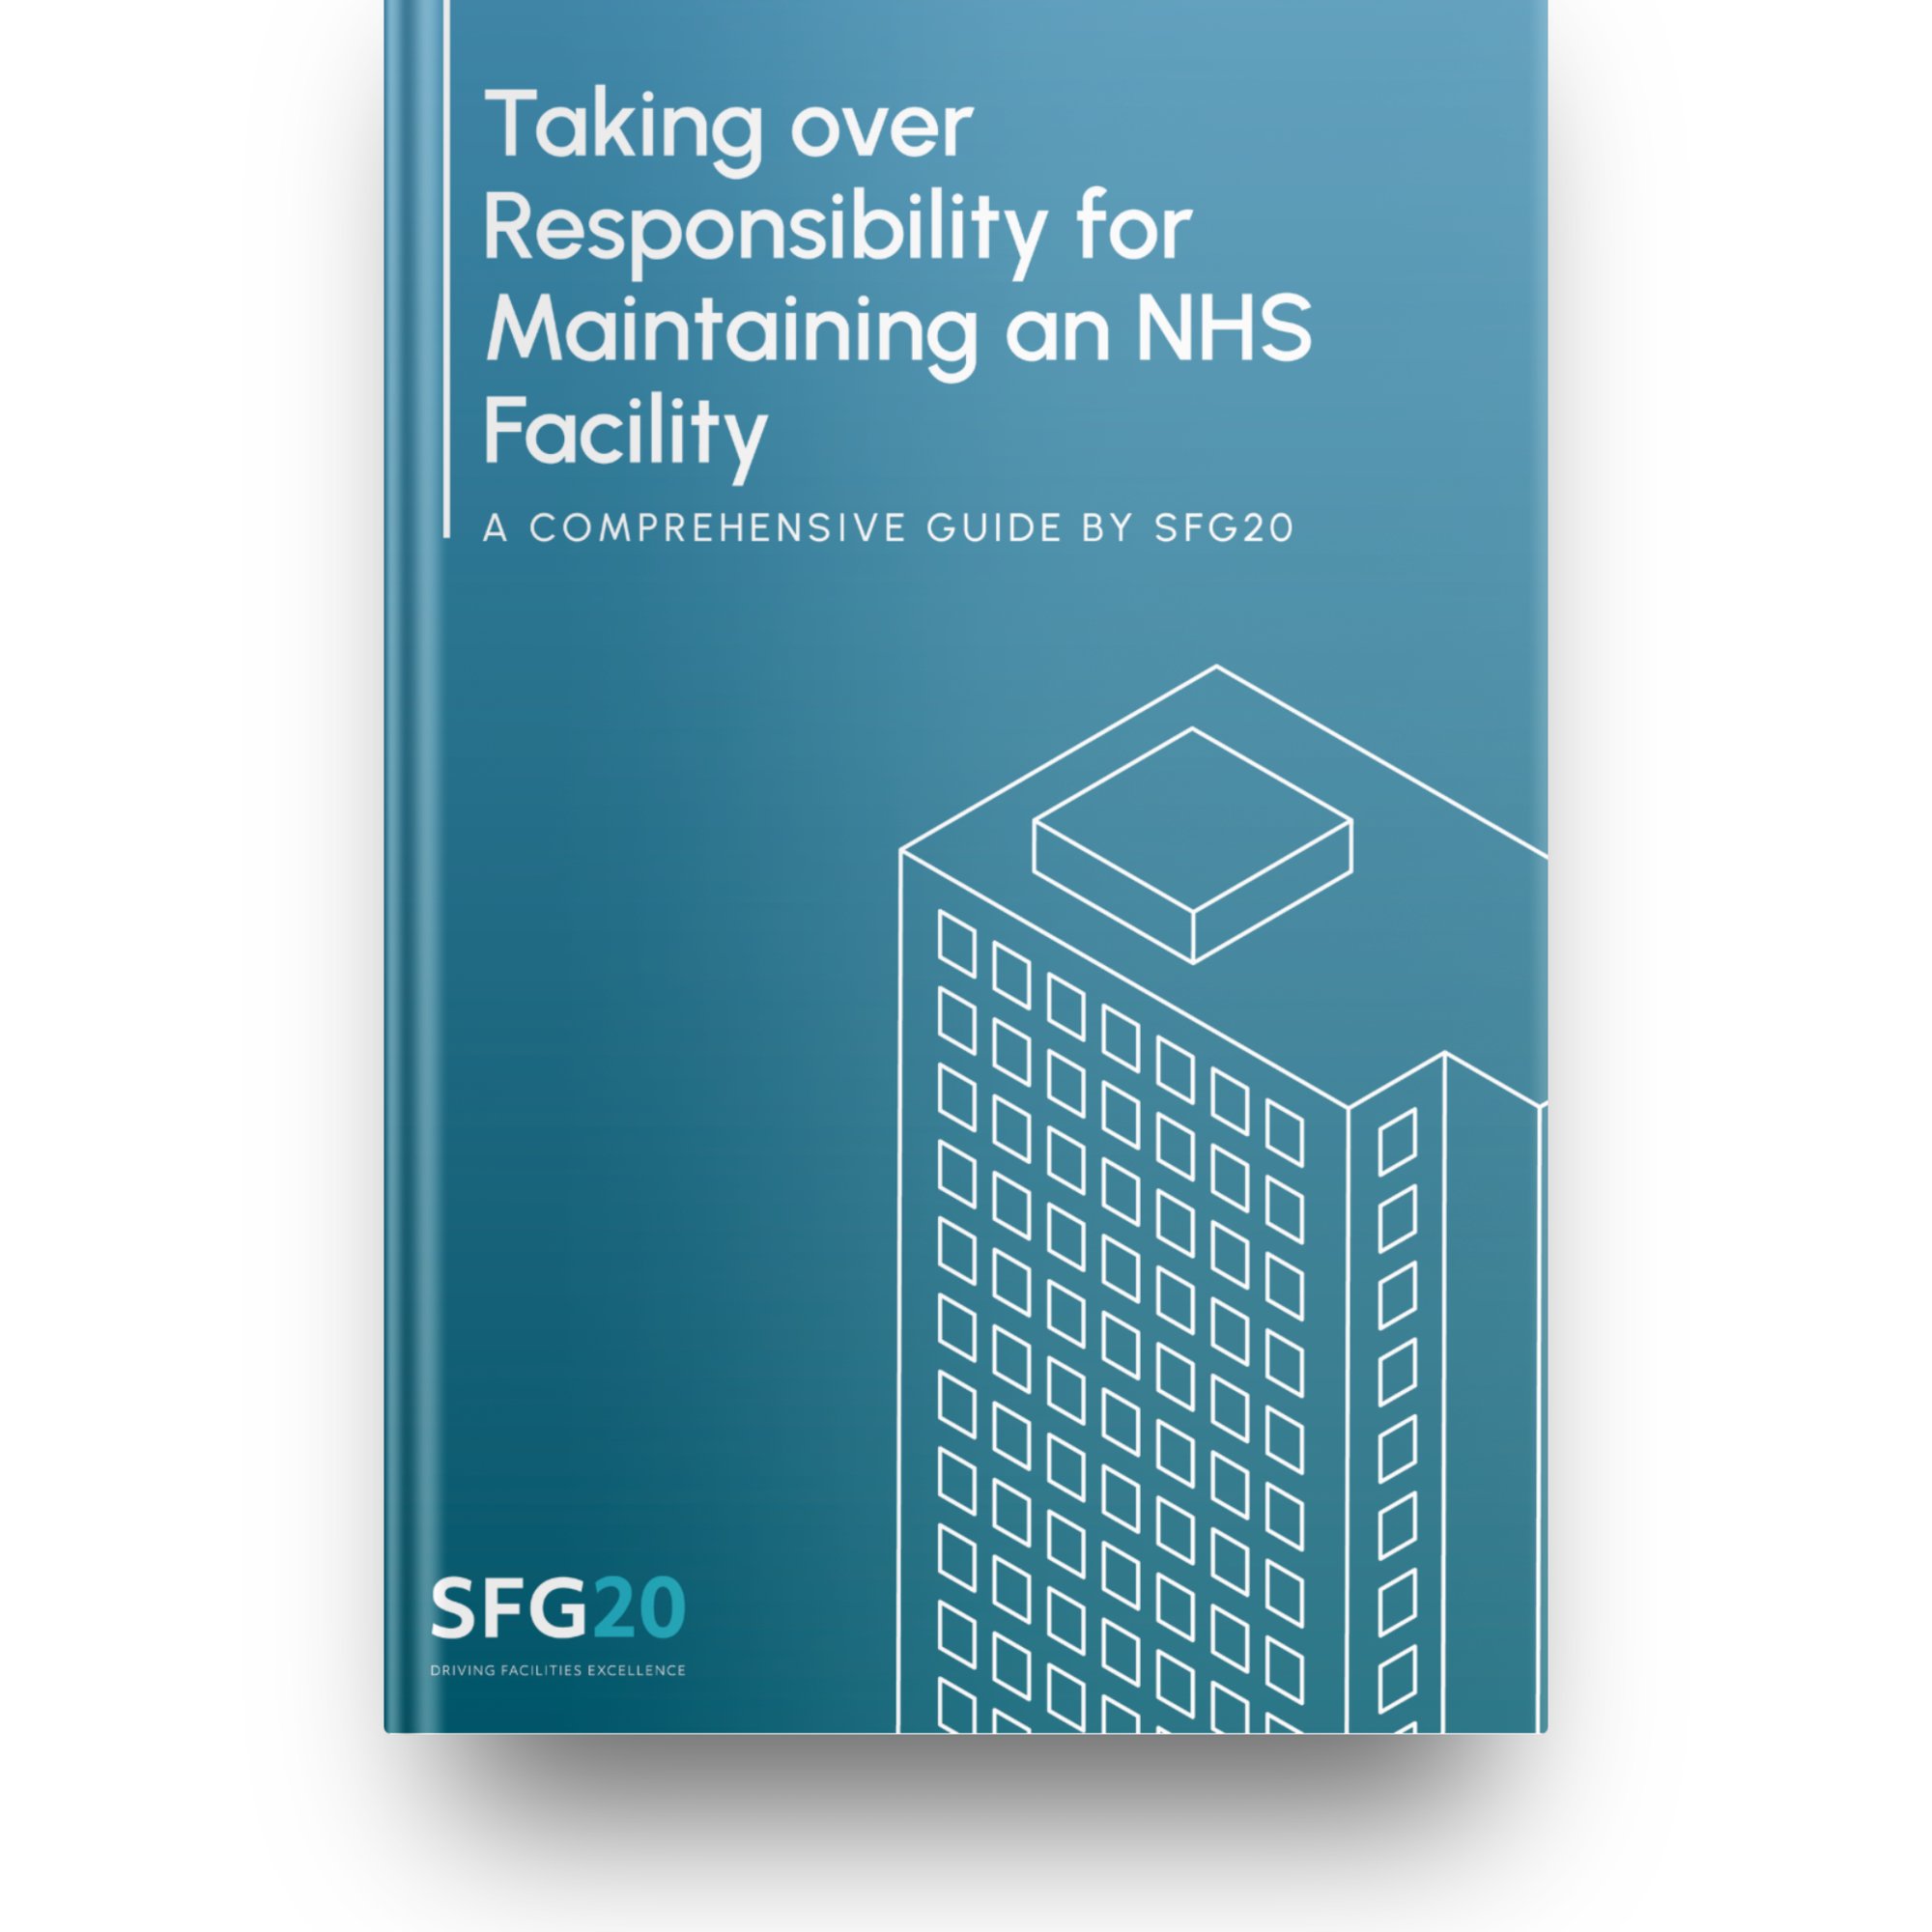 Taking over responsibility for maintaining an NHS facility